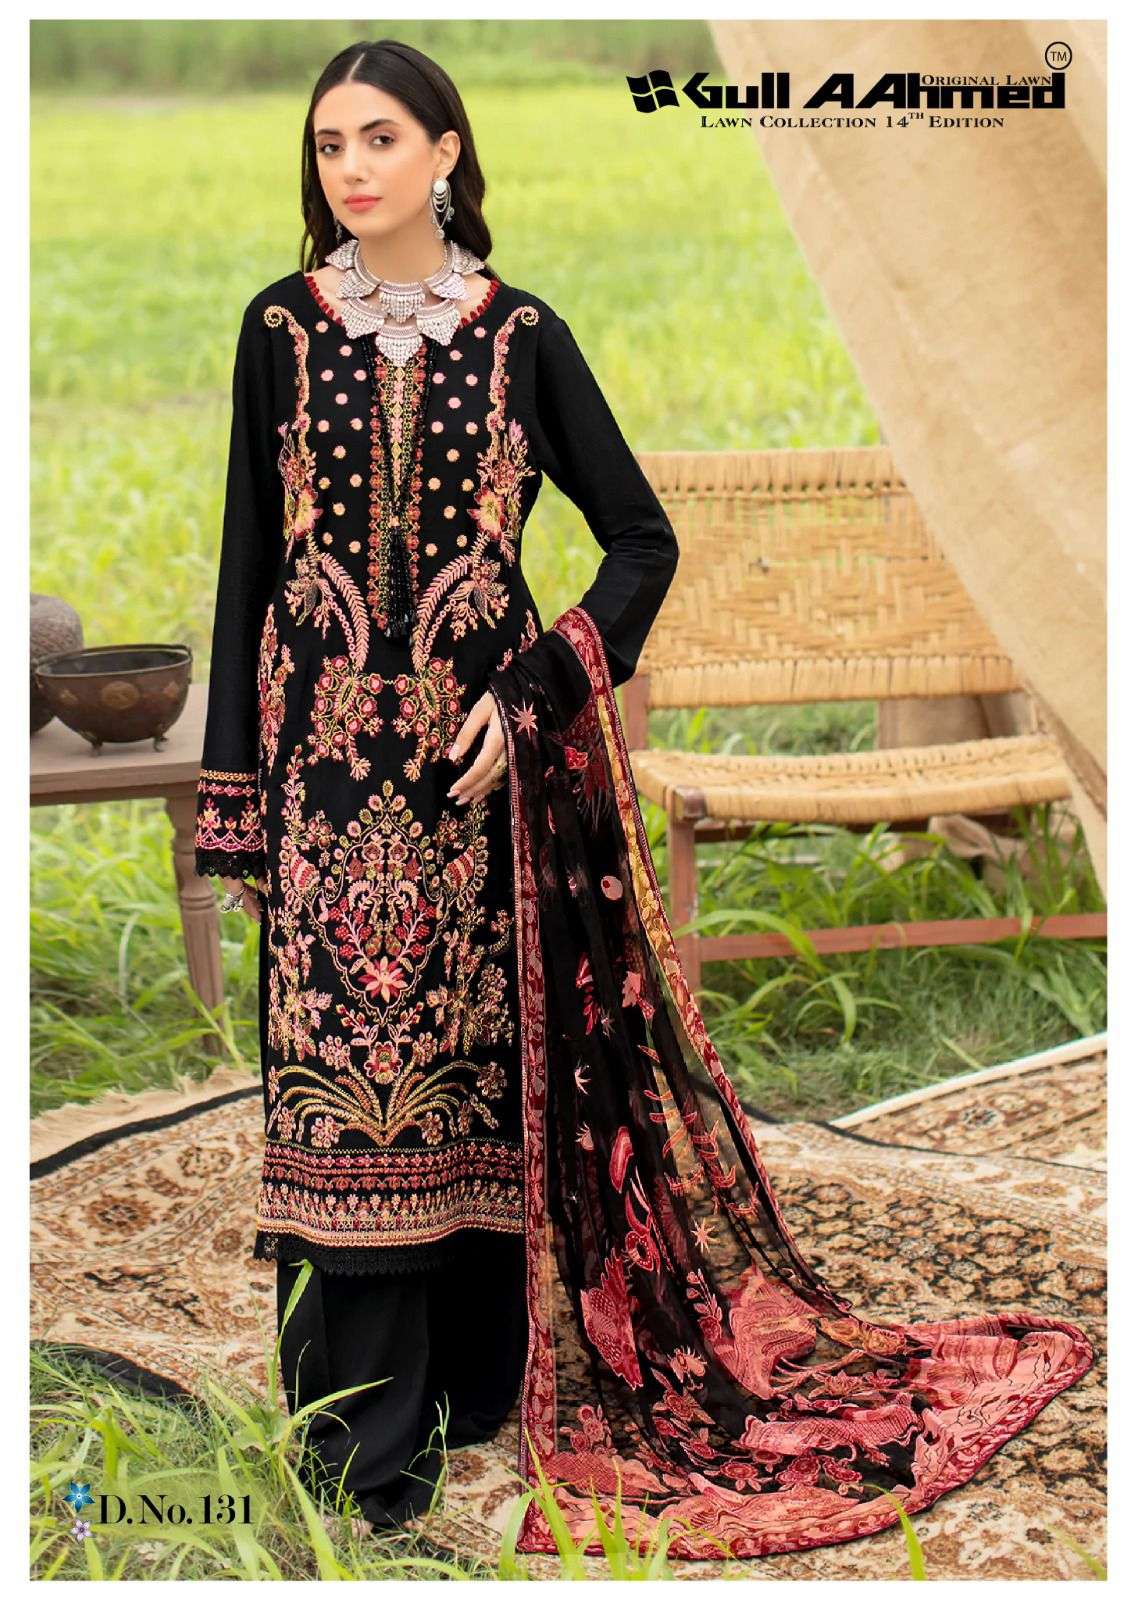 GULl AAHMED LAWN COLLECTION VOL 14